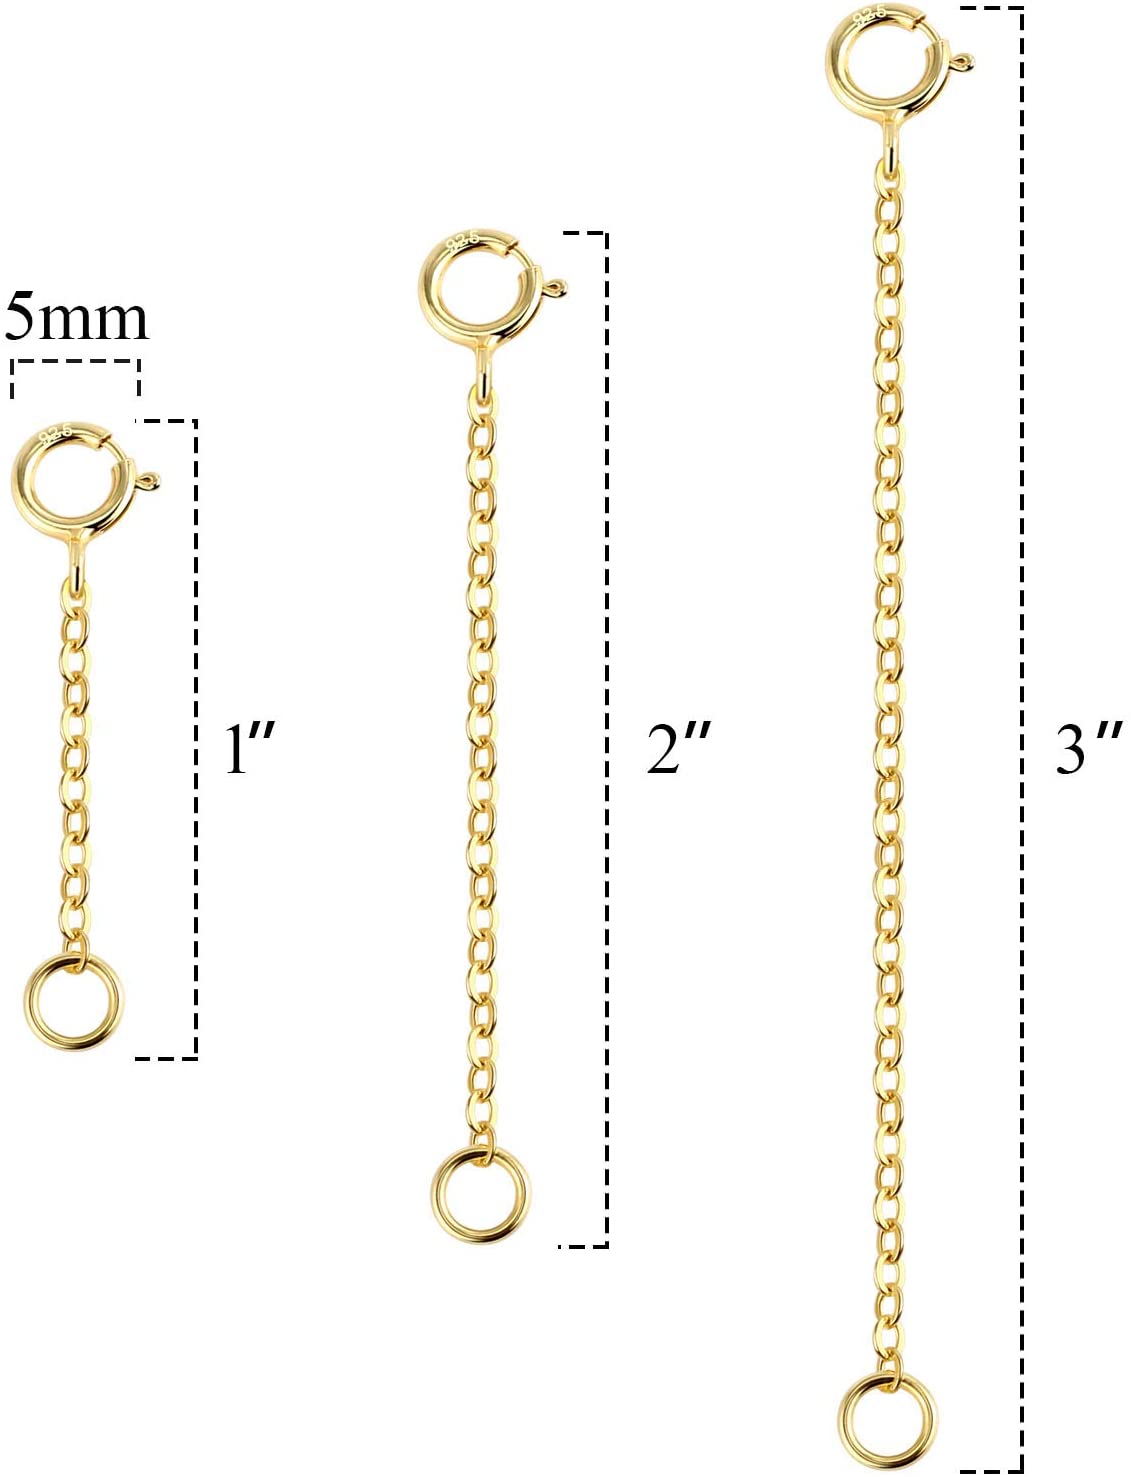 3 Pcs 925 Sterling Silver Necklace Extenders for Women Durable Strong  Removable Necklace Bracelet Anklet Extension for Jewelry Making(1 2 3 Inch,  Gold) 